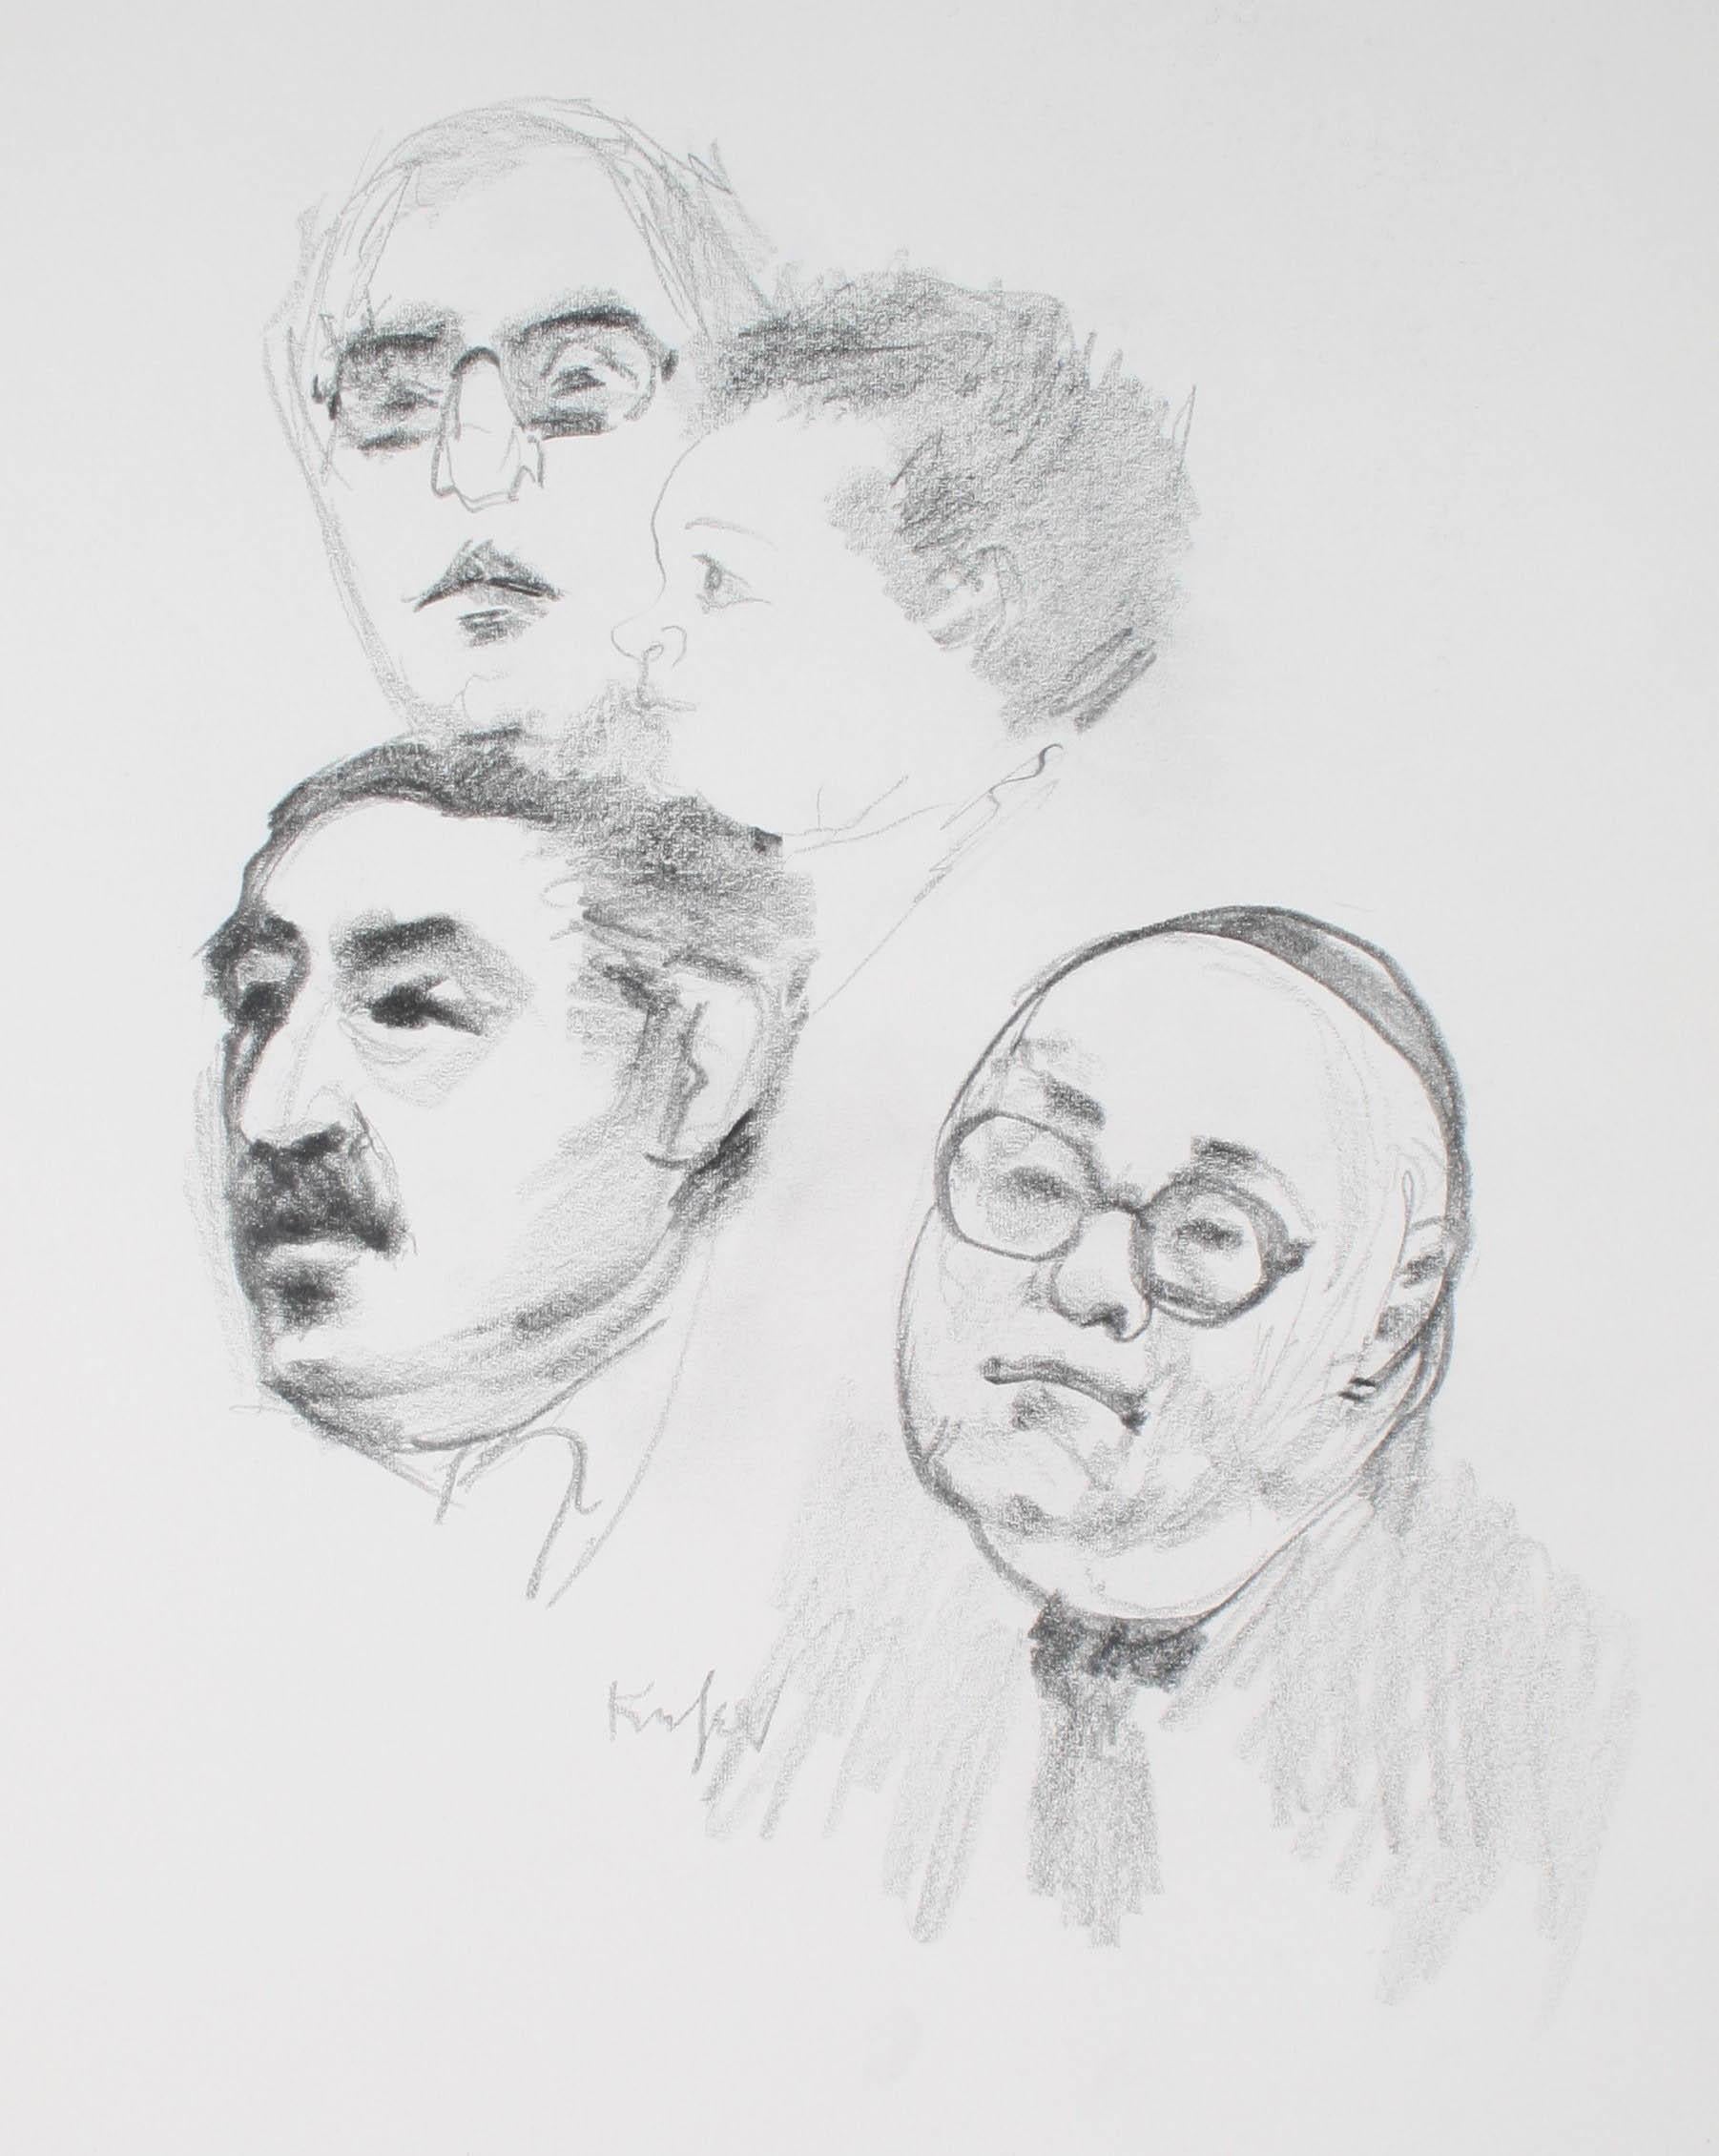 This mid to late 20th century graphite on paper drawing featuring portraits of men is by Morris Kronfeld (1914-2011) was a New York Modernist artist.  He studied art, biology, & art history at Brooklyn College and received a master's degree at NYU.